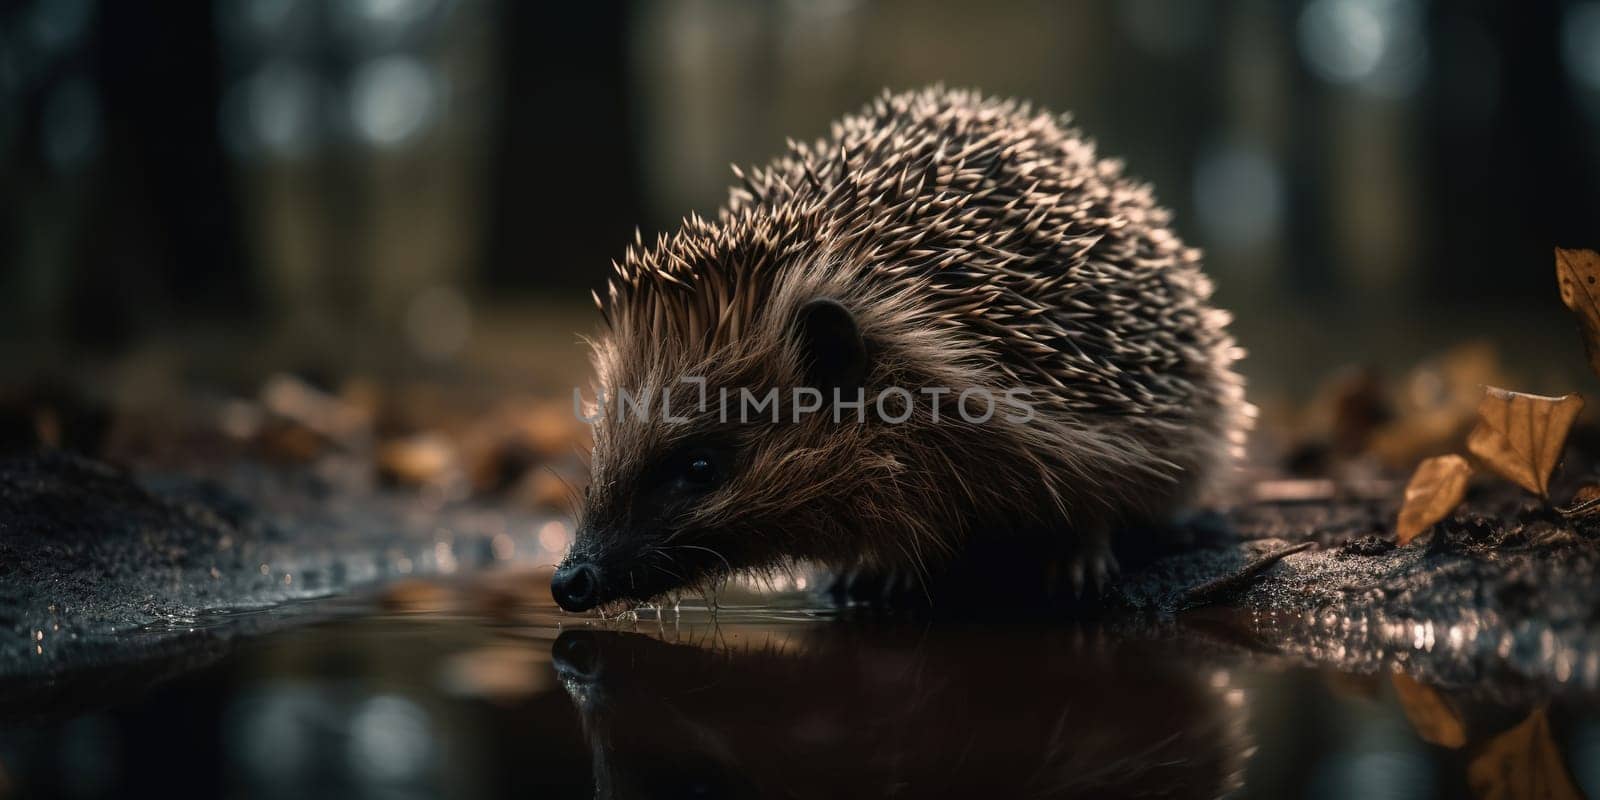 Wild Hedgehog Drinks Water From The Puddle In The Forest by tan4ikk1